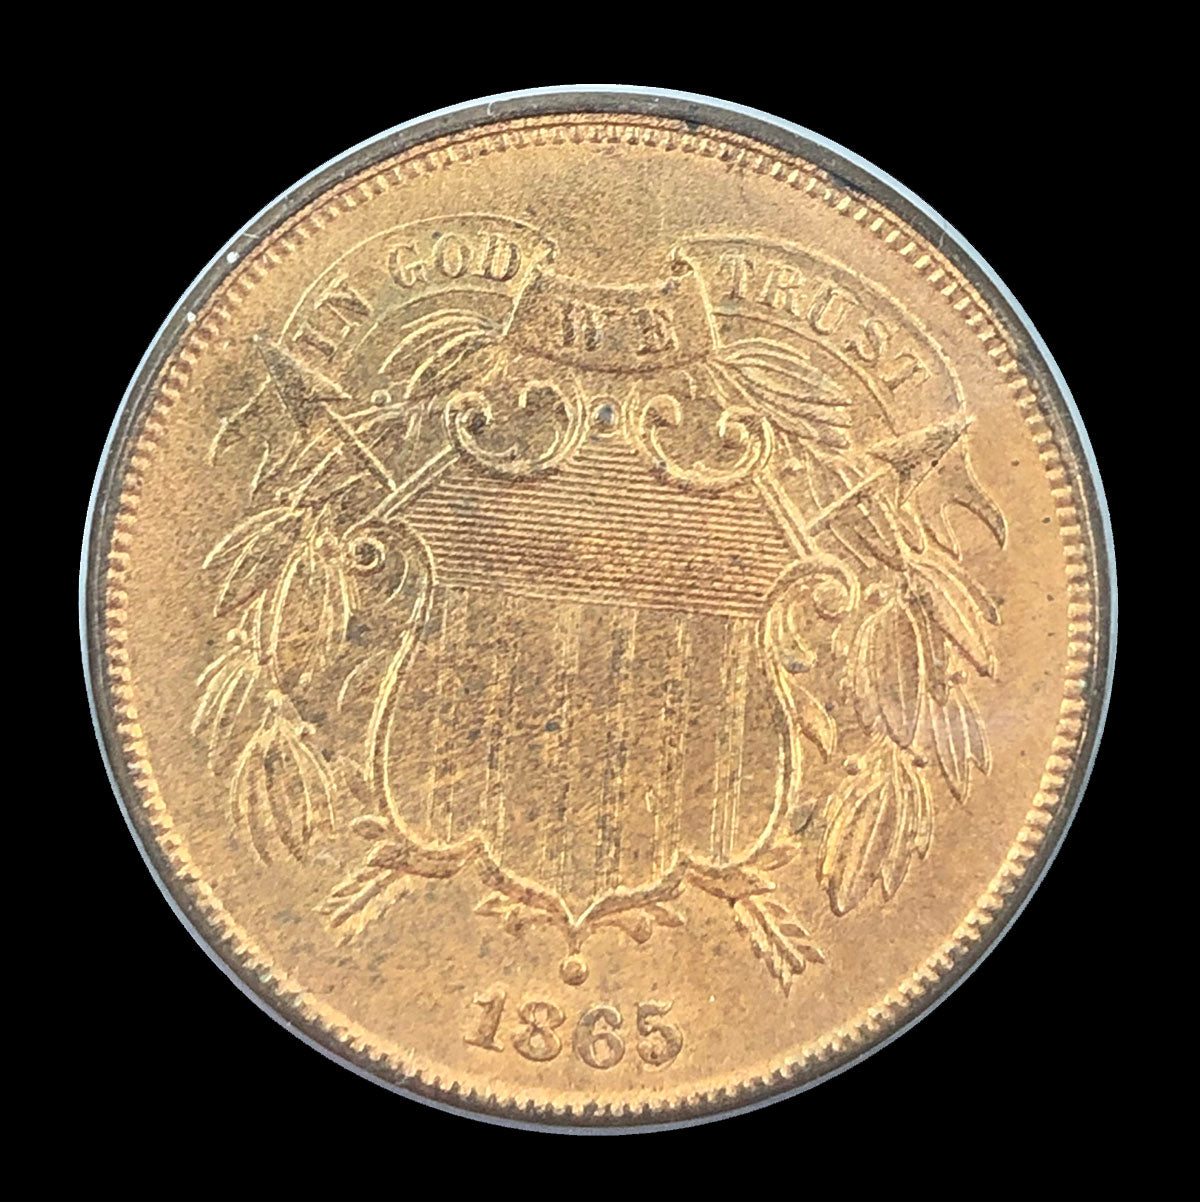 1865 Fancy 5 Two Cent Piece FS-1302 Repunched Date Vintage ANACS AU55